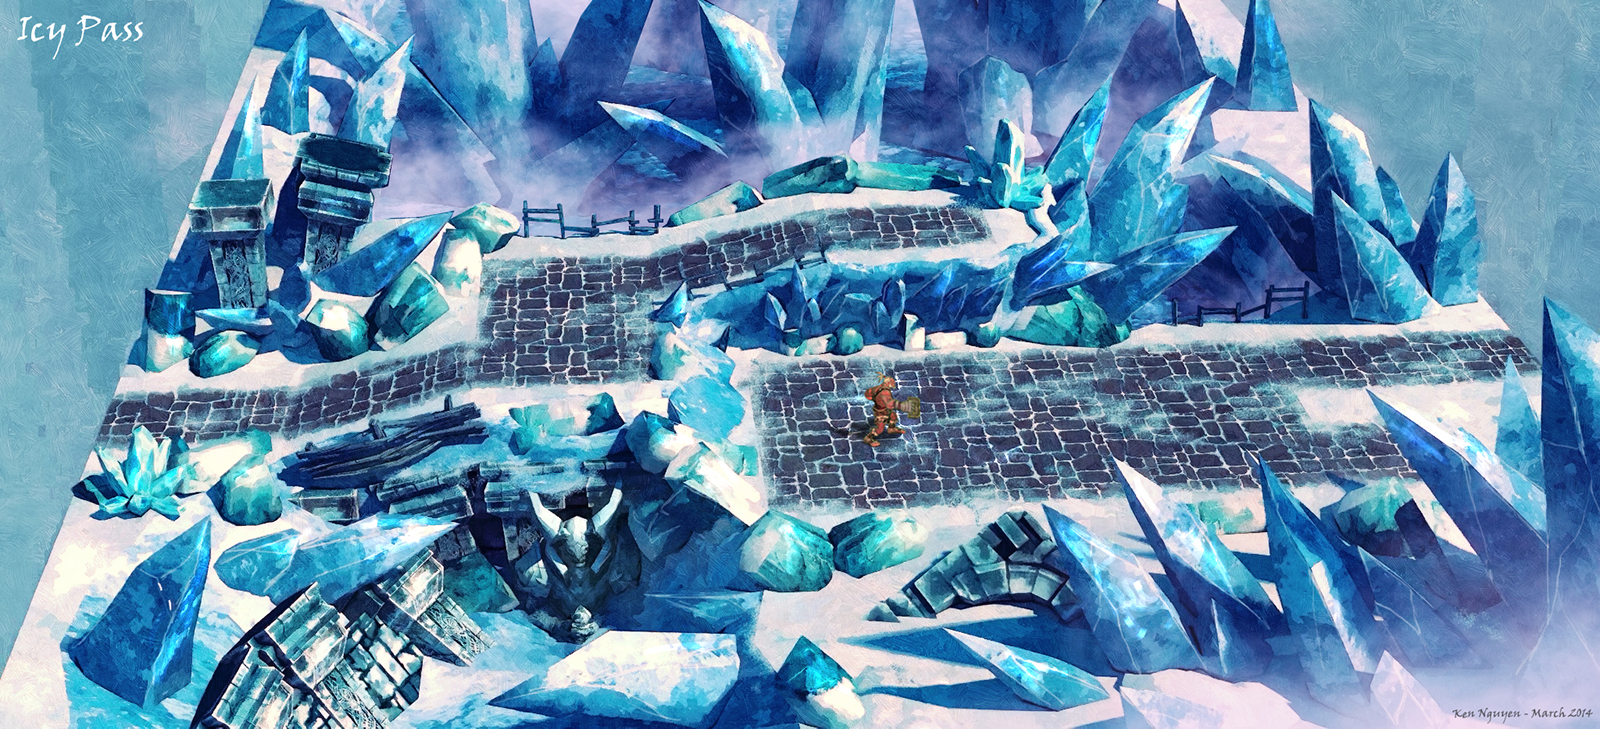 chapter_2_icy_pass_tile_02_concept.jpg